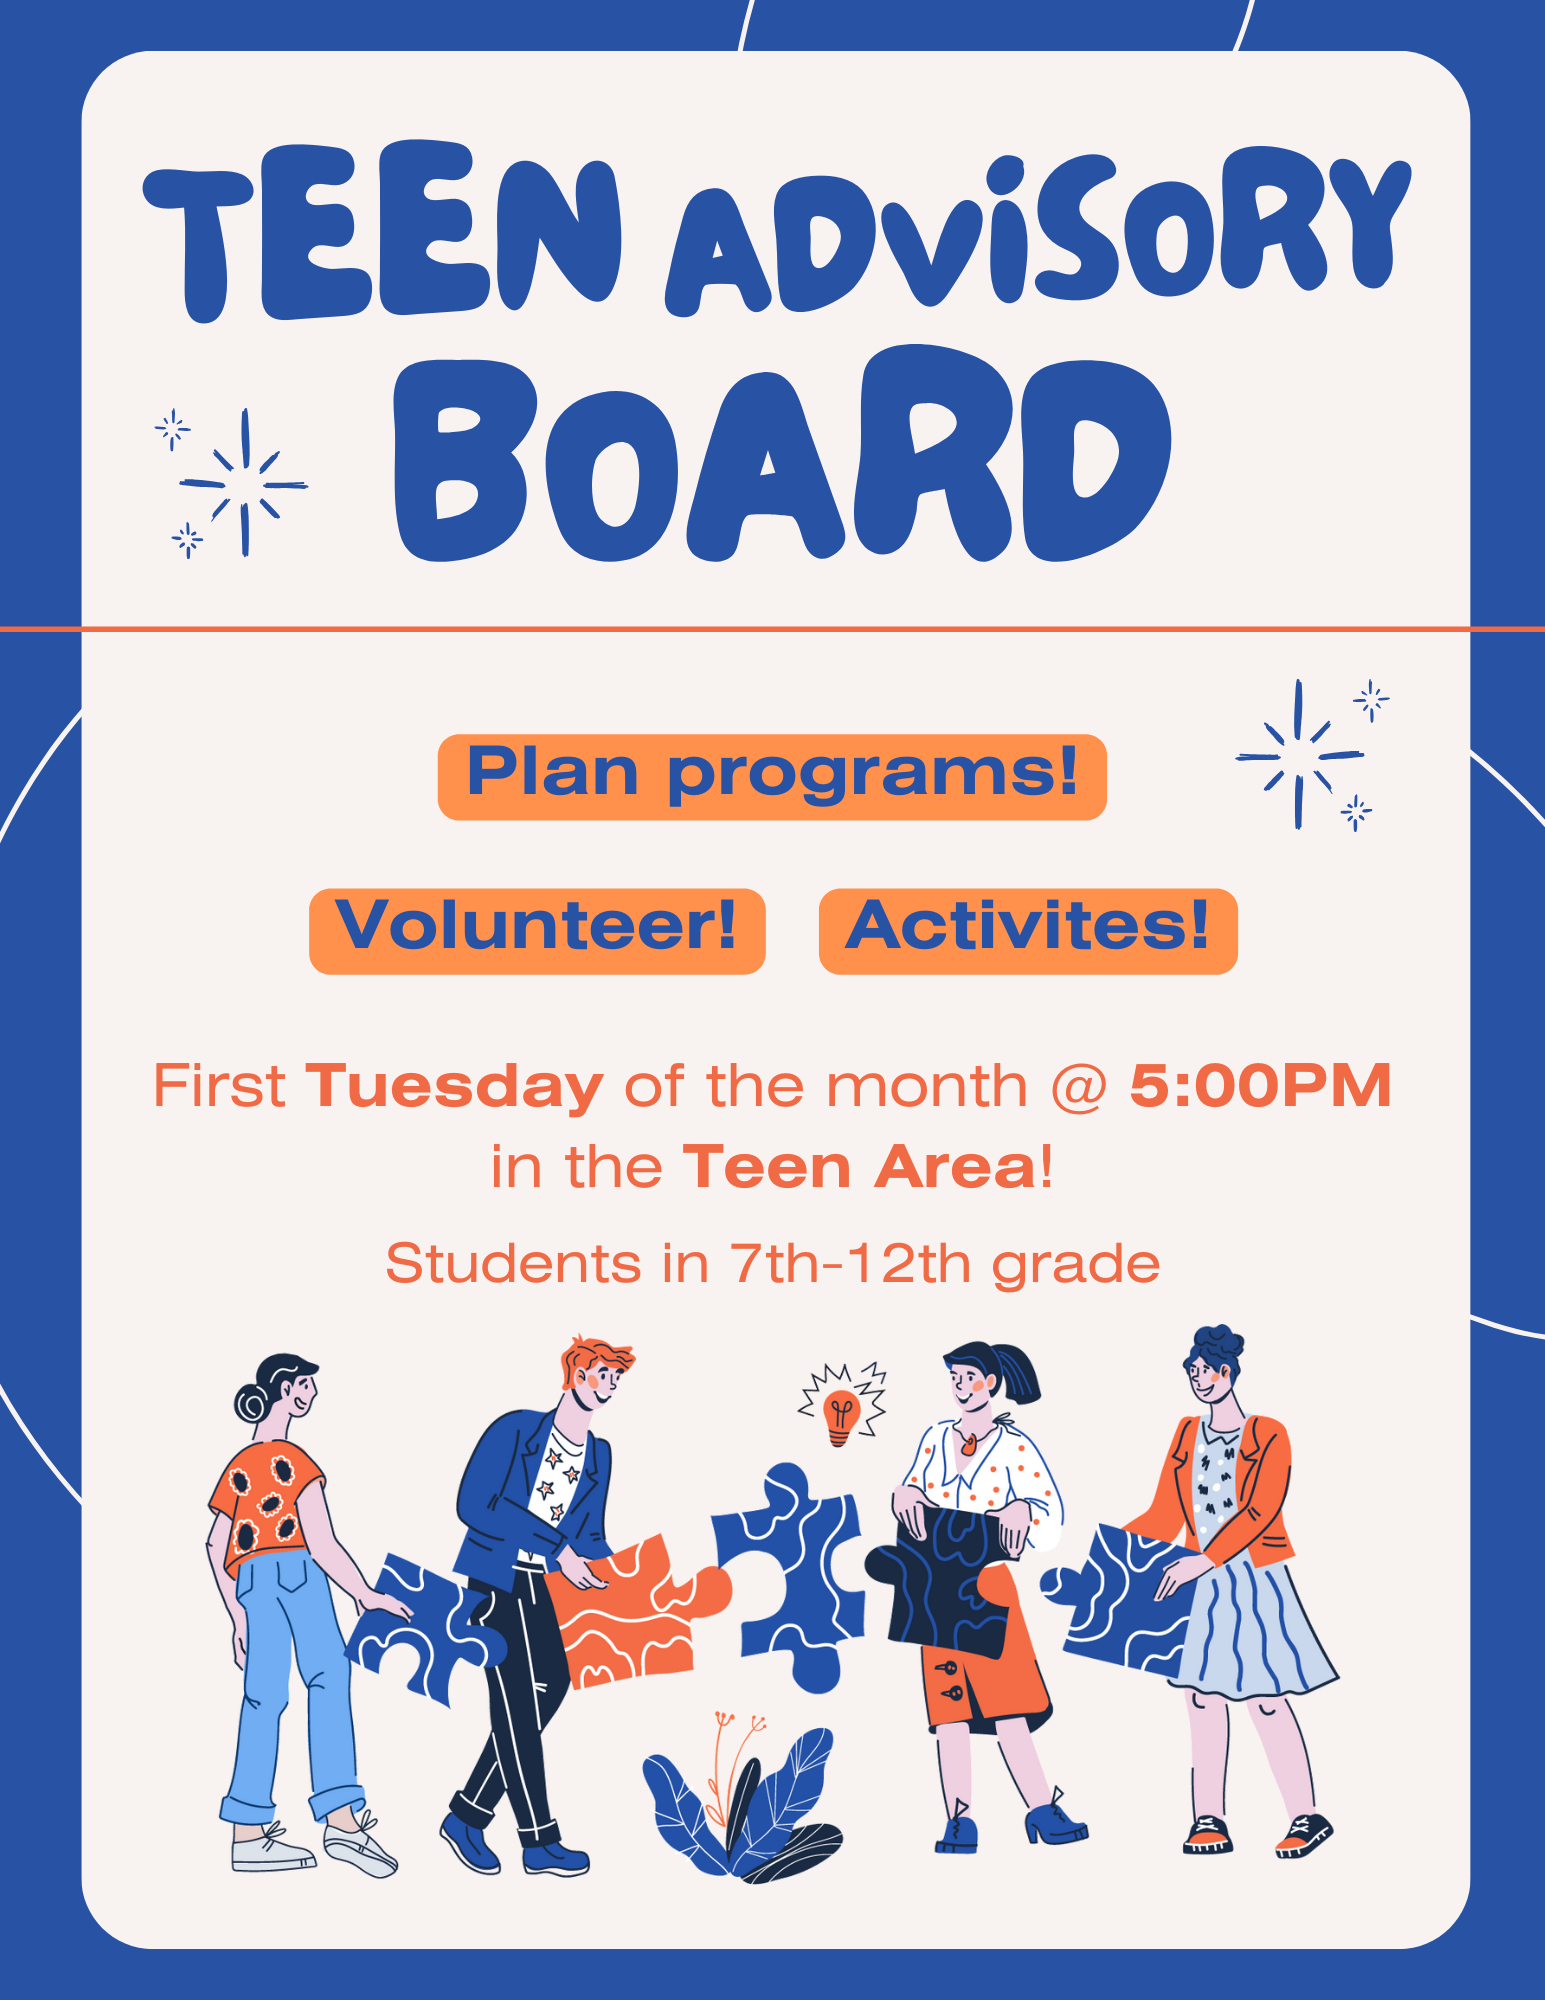 Teen Advisory Board first Tuesday of the month @ 5:00PM for students in 7th-12th grade